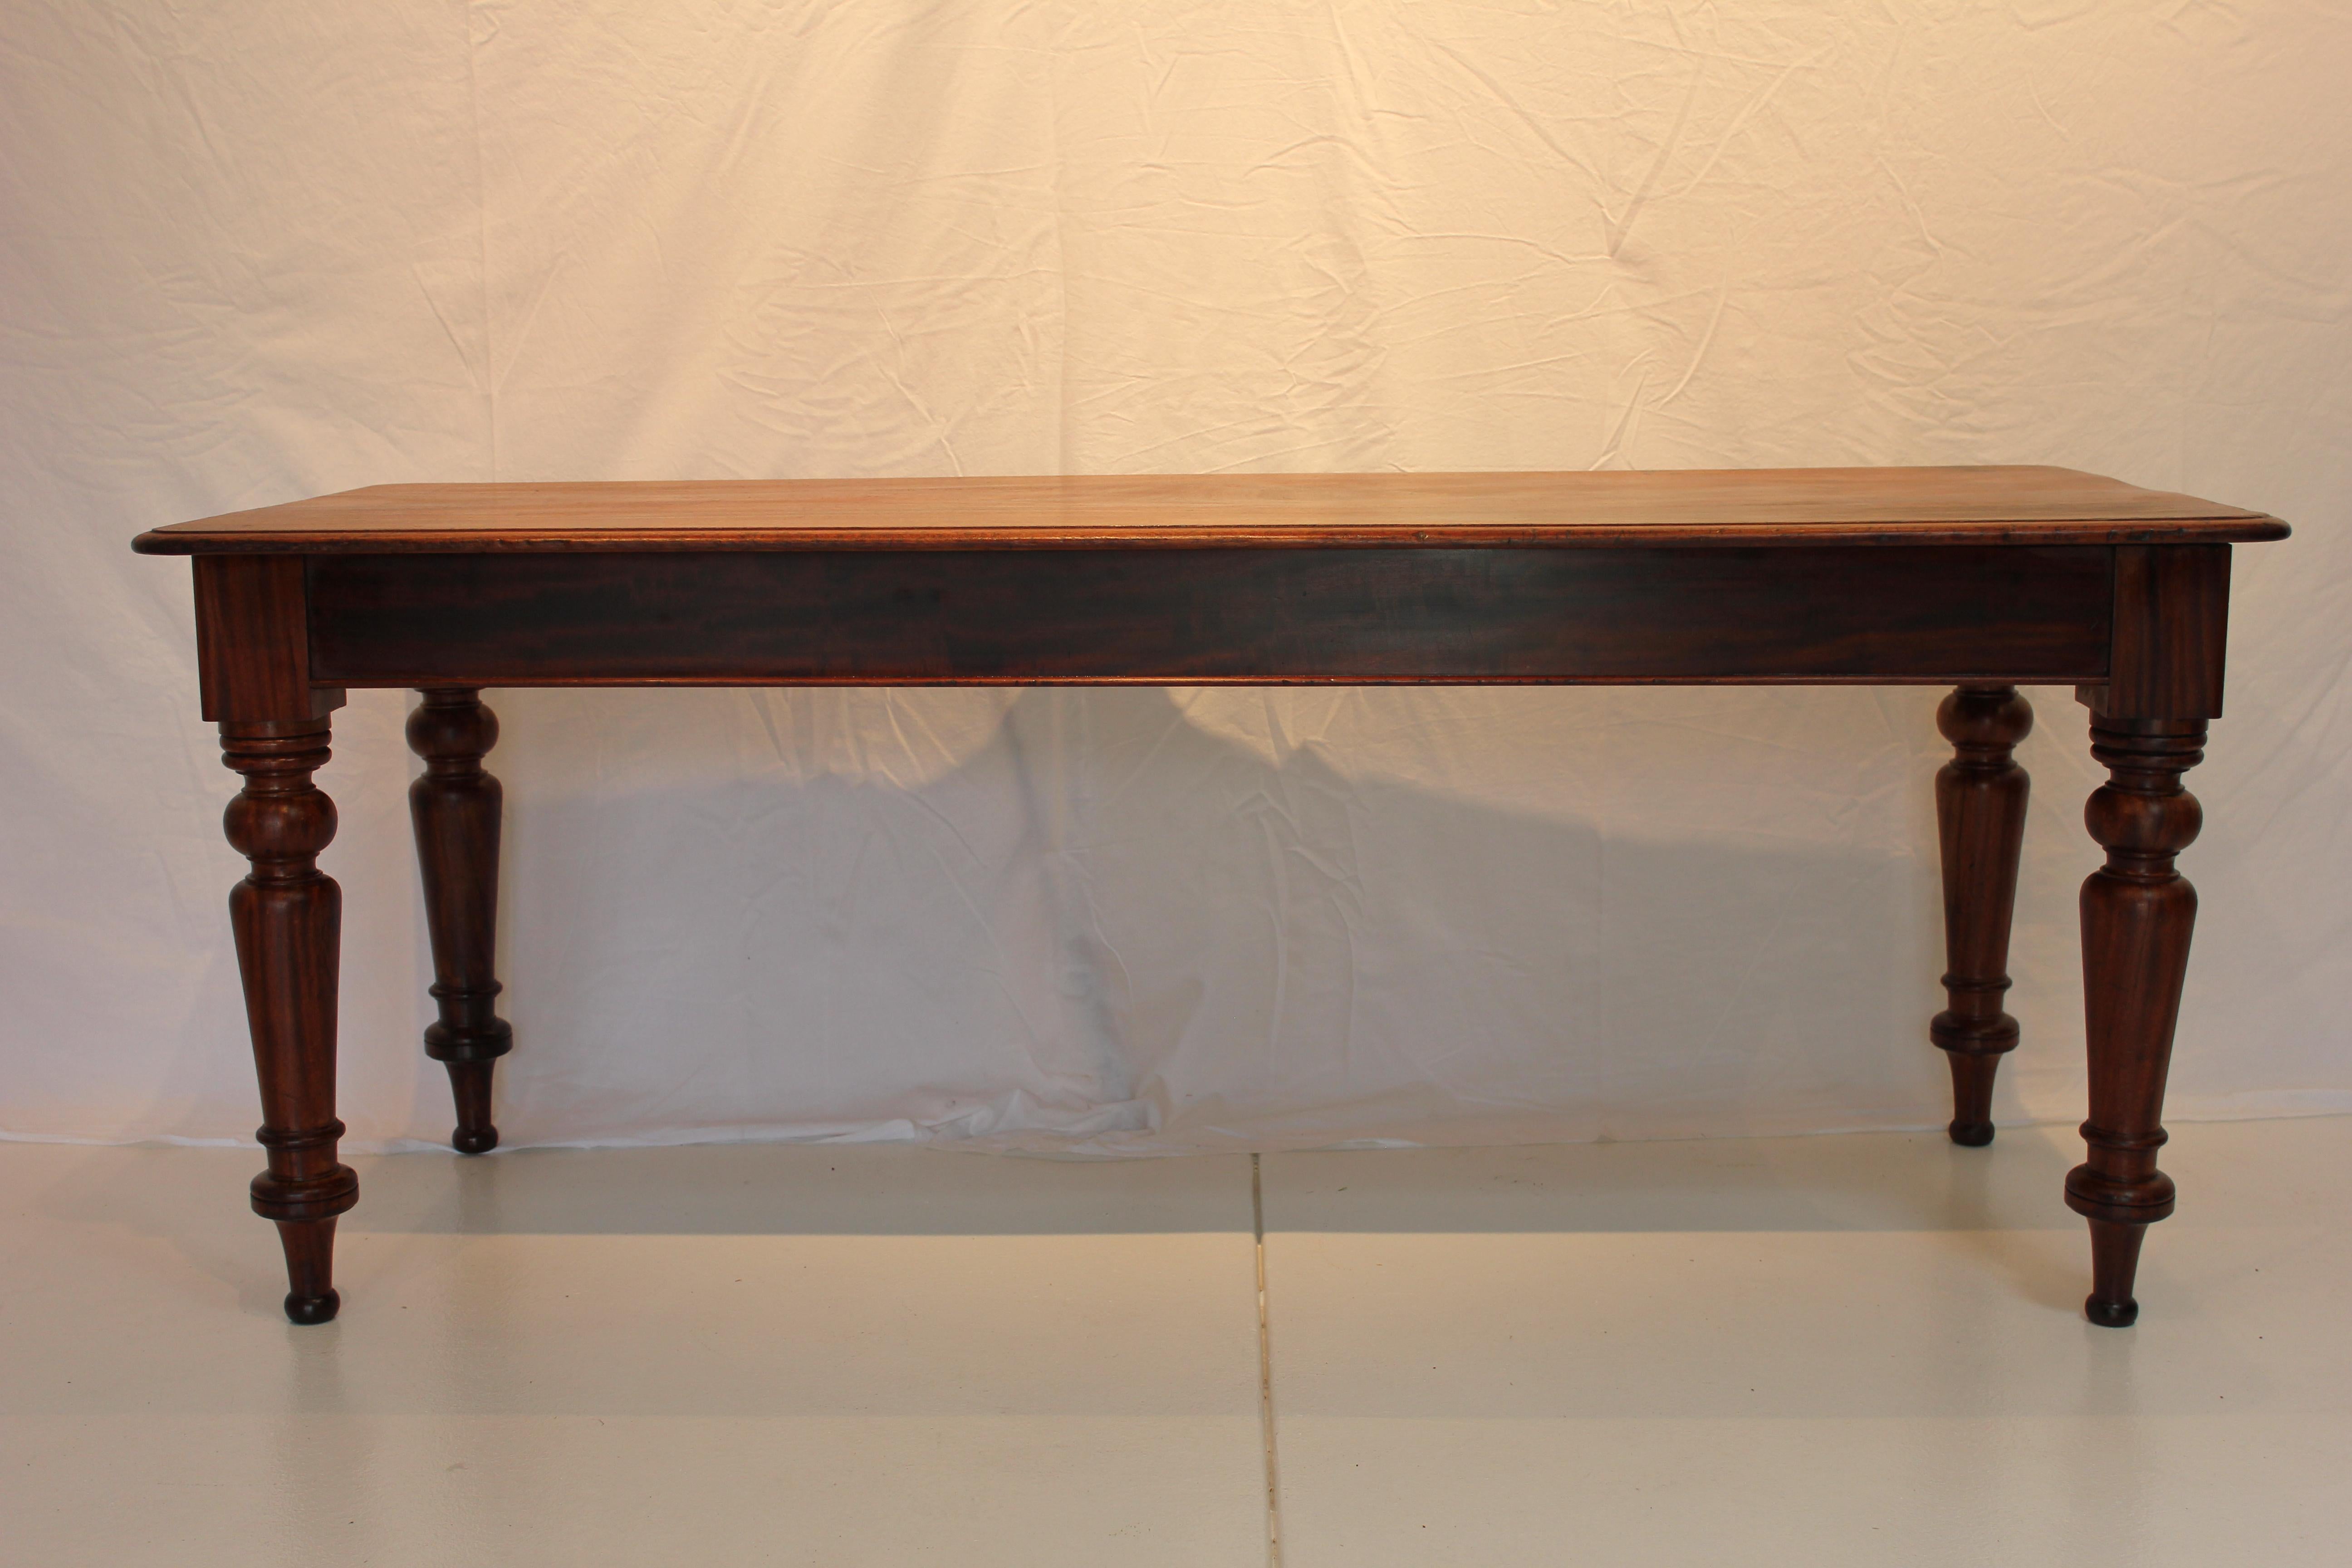 Massive Early 20th Century Large Spanish Colonial Revival Style  wide plank solid oak refectory table original to the historic Mission Inn, Riverside, CA - having a plank top and rising on barley twist legs conjoined by the box stretcher, 32